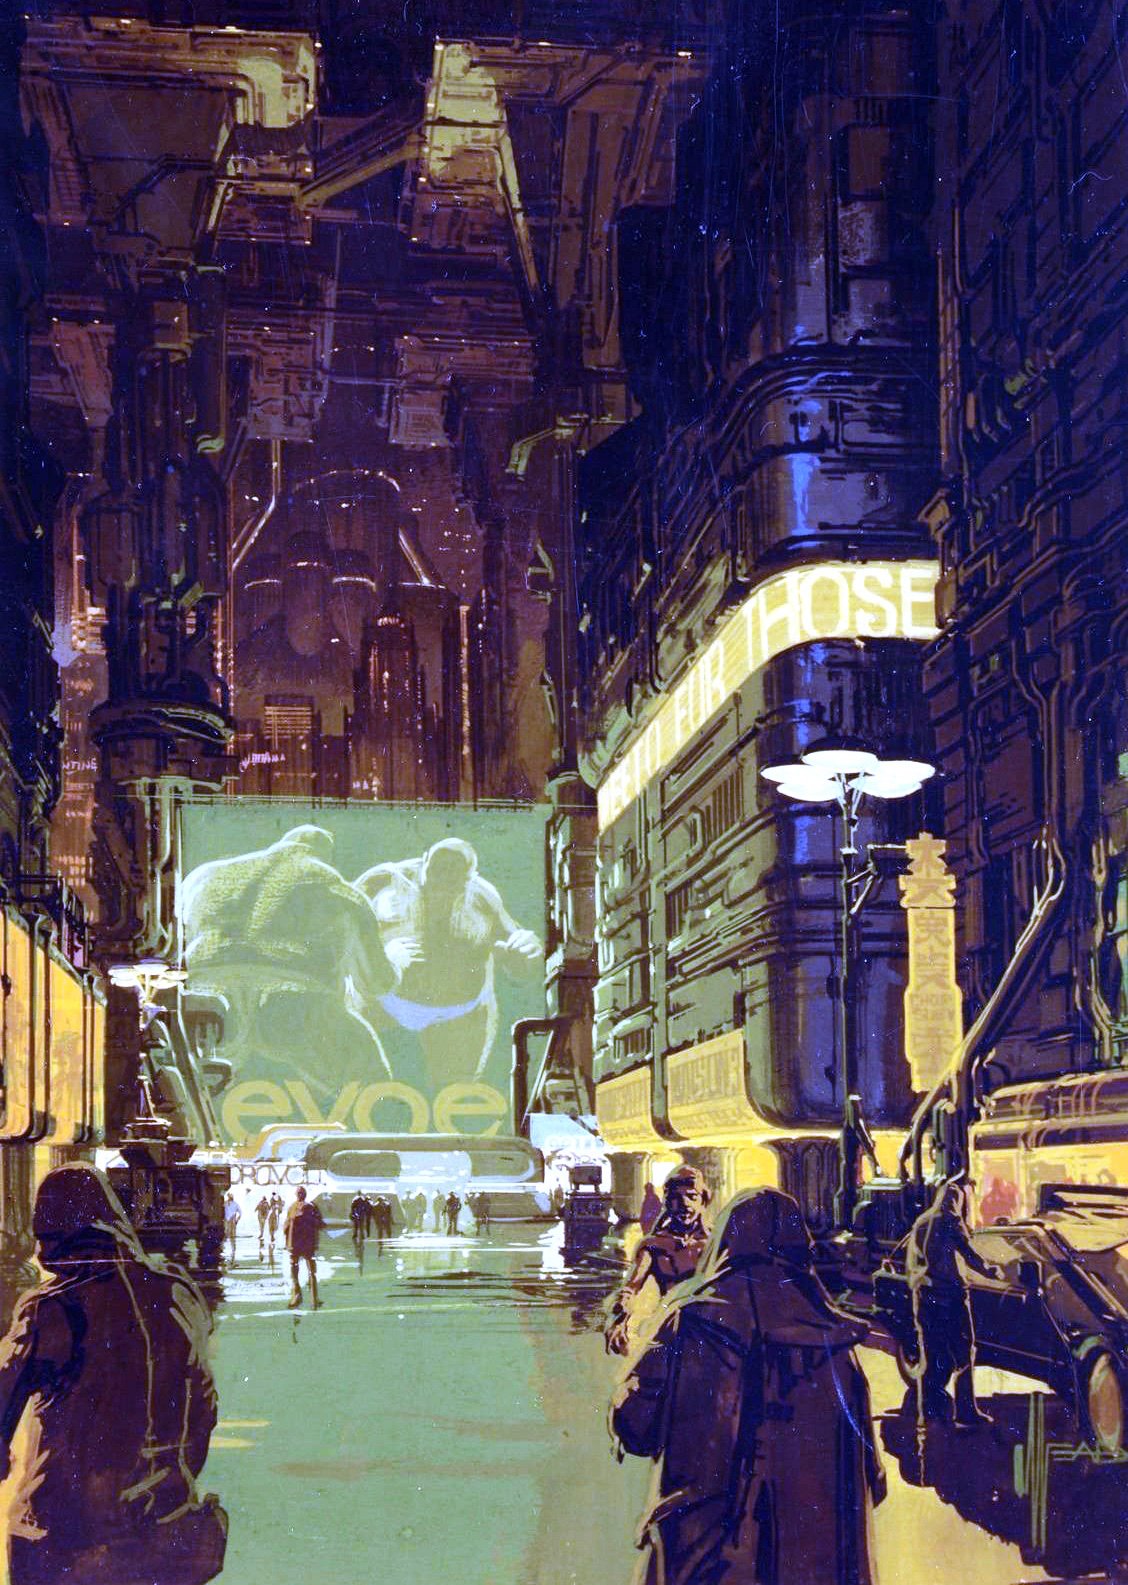 Some more beautiful Concept Art from Syd Mead. This one was my Phone Wallpaper for a while